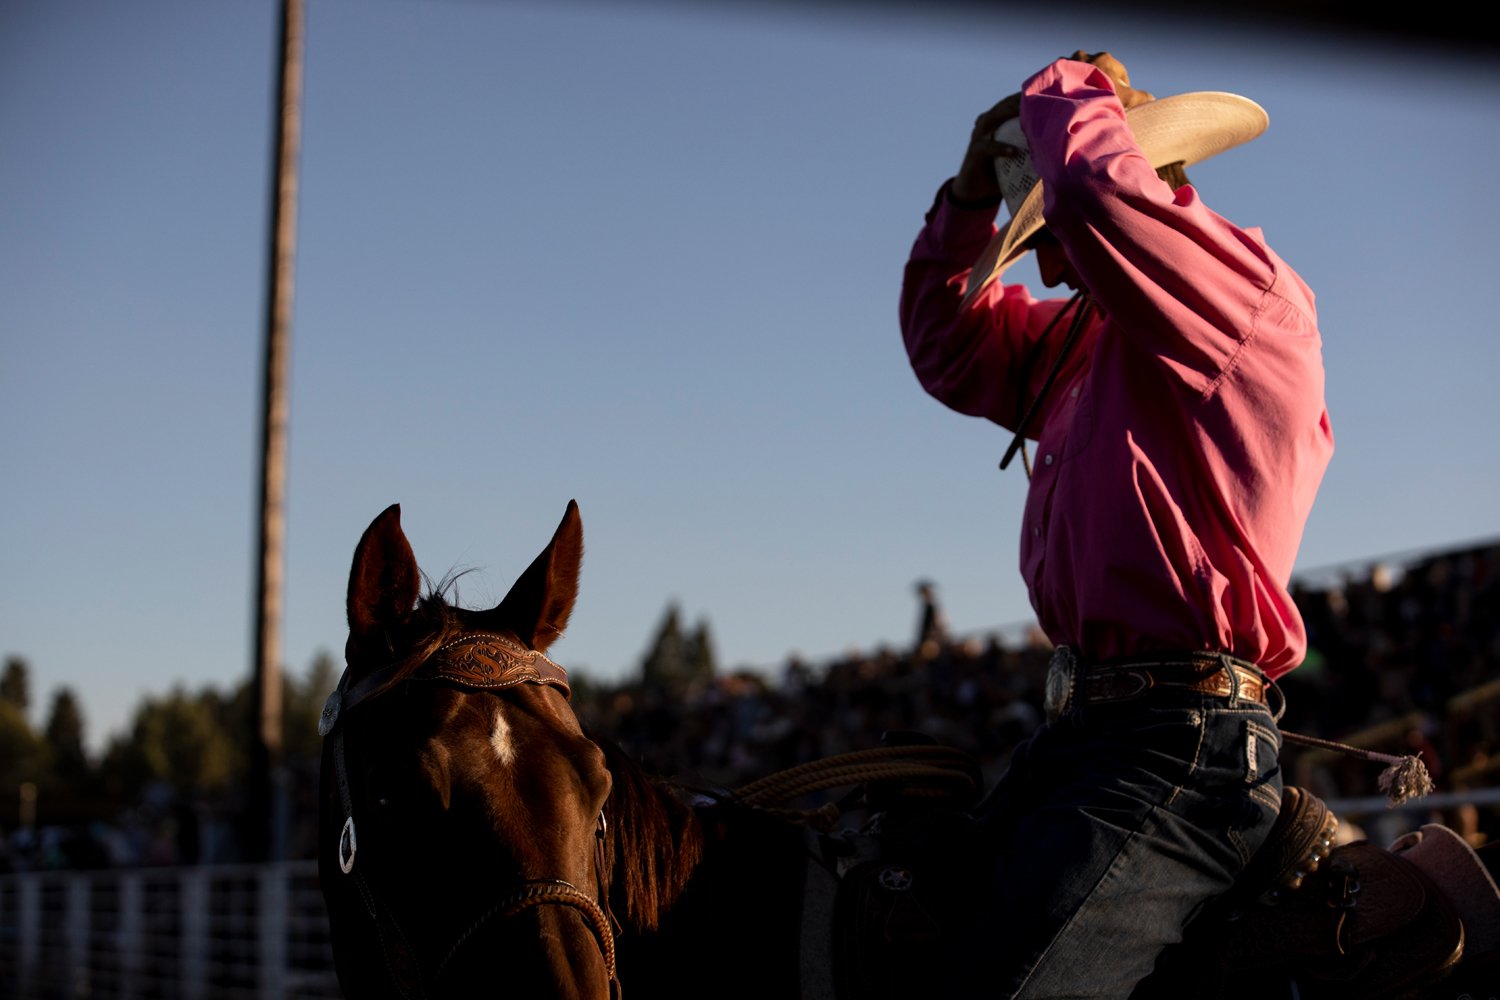  A rider prepares for a roping event Saturday during the Columbia County Fair and Rodeo in St Helens, Ore. 